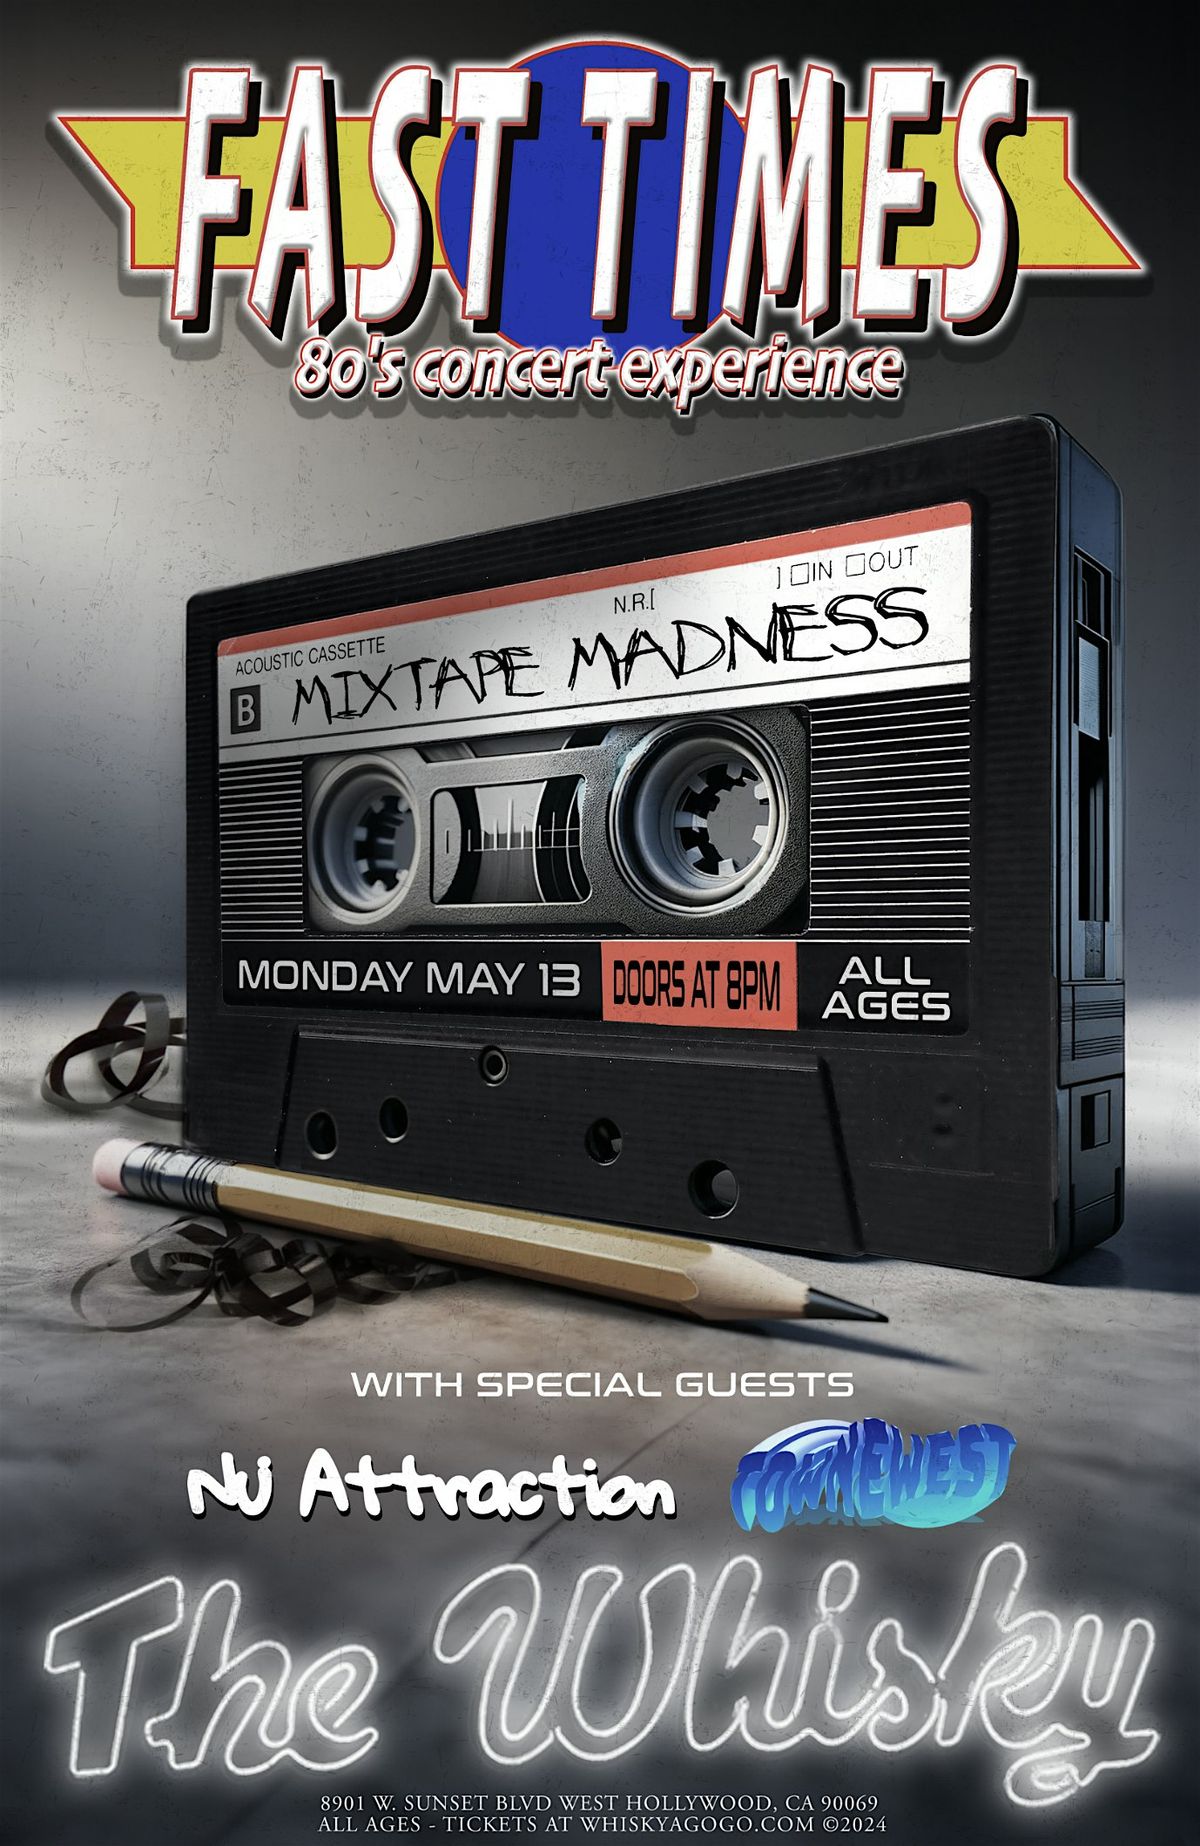 Fast Times 80s Concert Experience (Mixtape Madness)